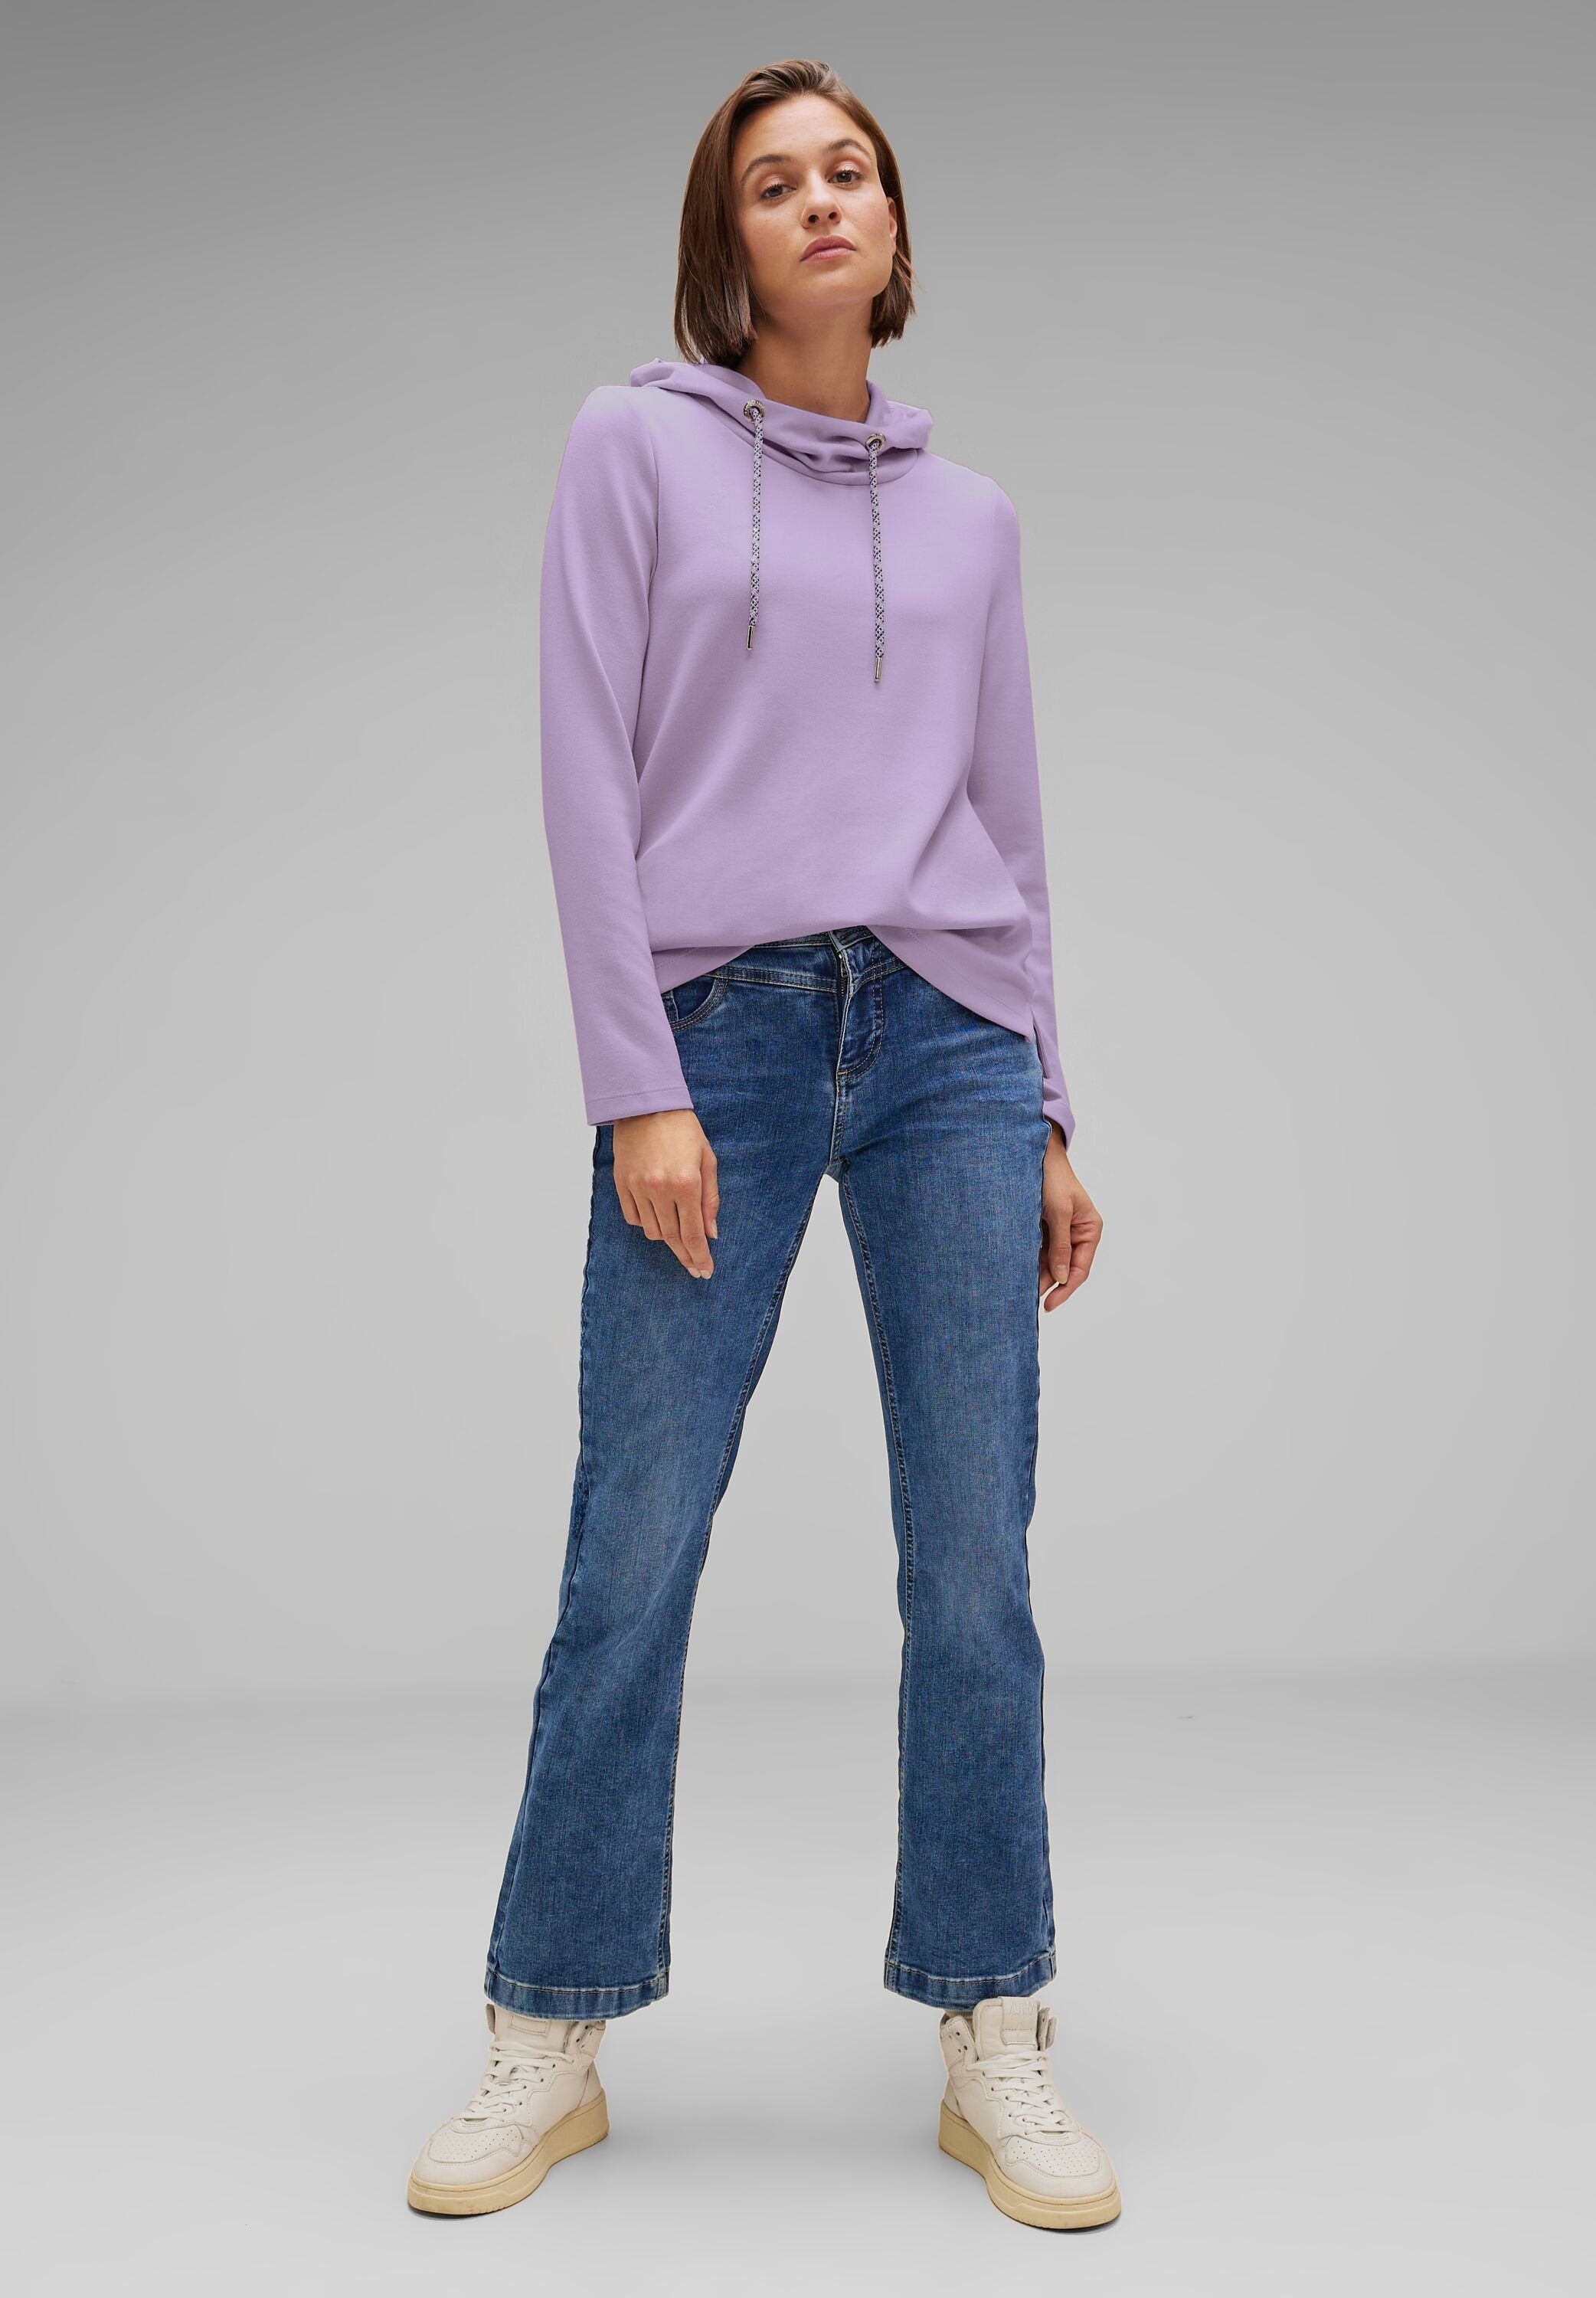 ONE pure STREET soft lilac Strickpullover